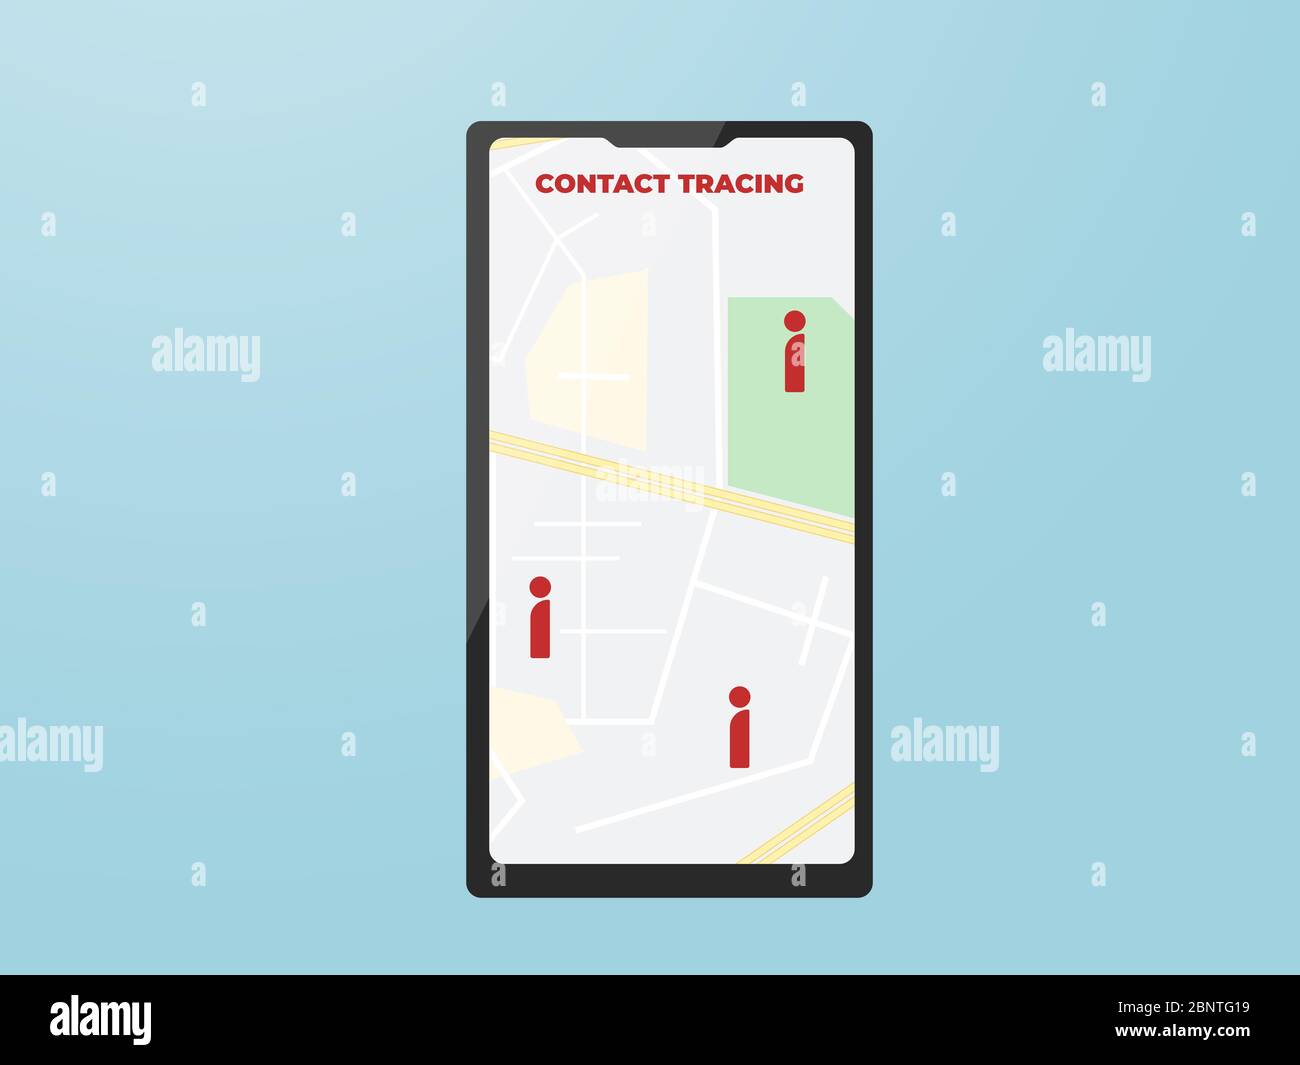 Illustration of contact tracing technology for covid-19 tracking. Healthy care tracking app Stock Photo